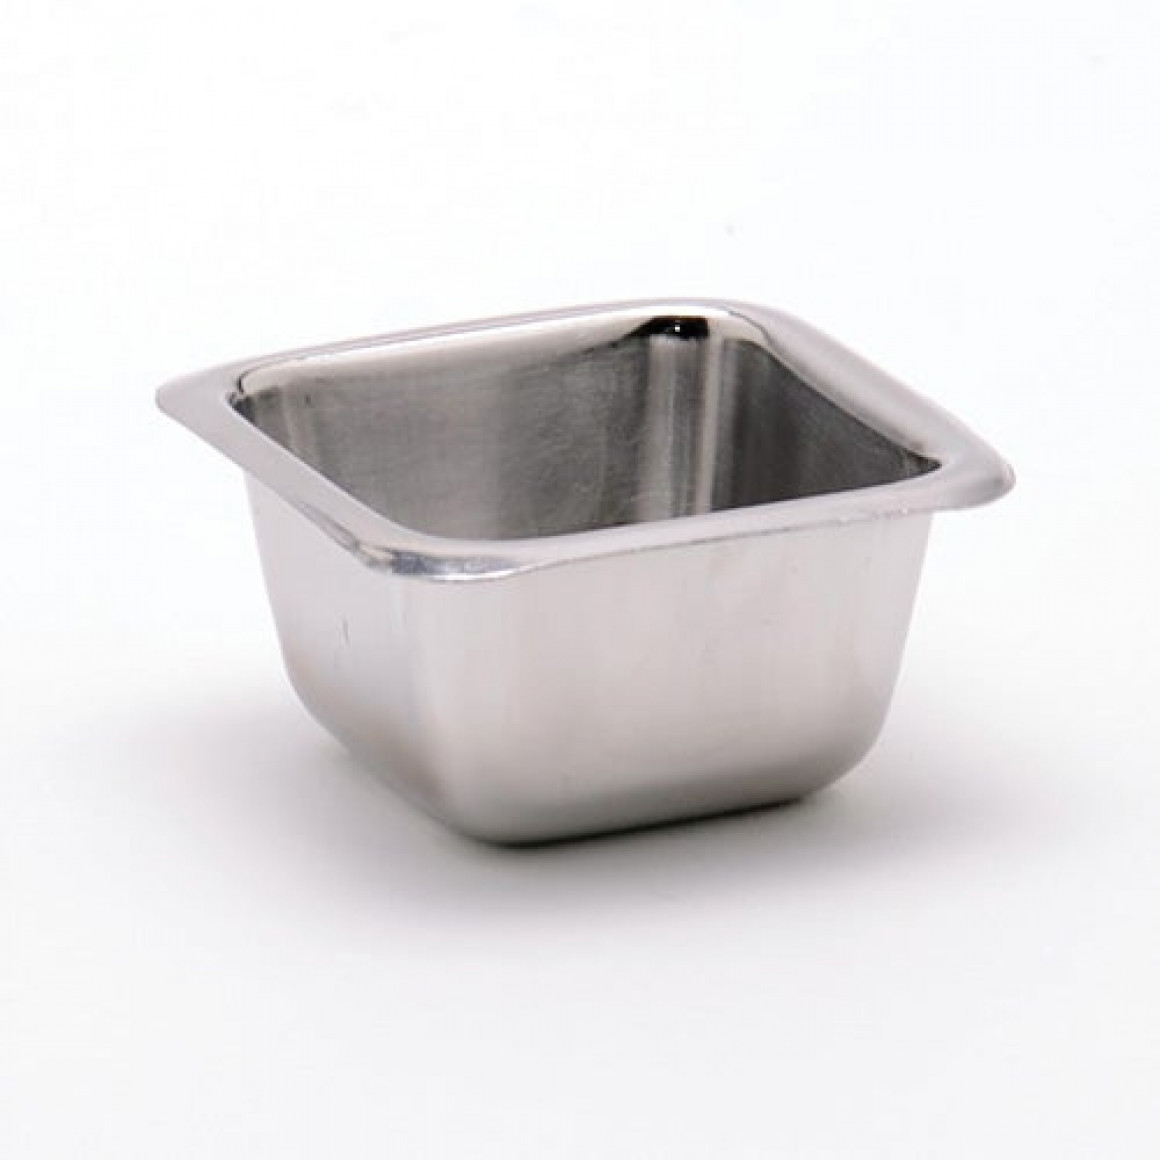 SAUCE CUP, STAINLESS STEEL, SQUARE, 1.5 OZ.